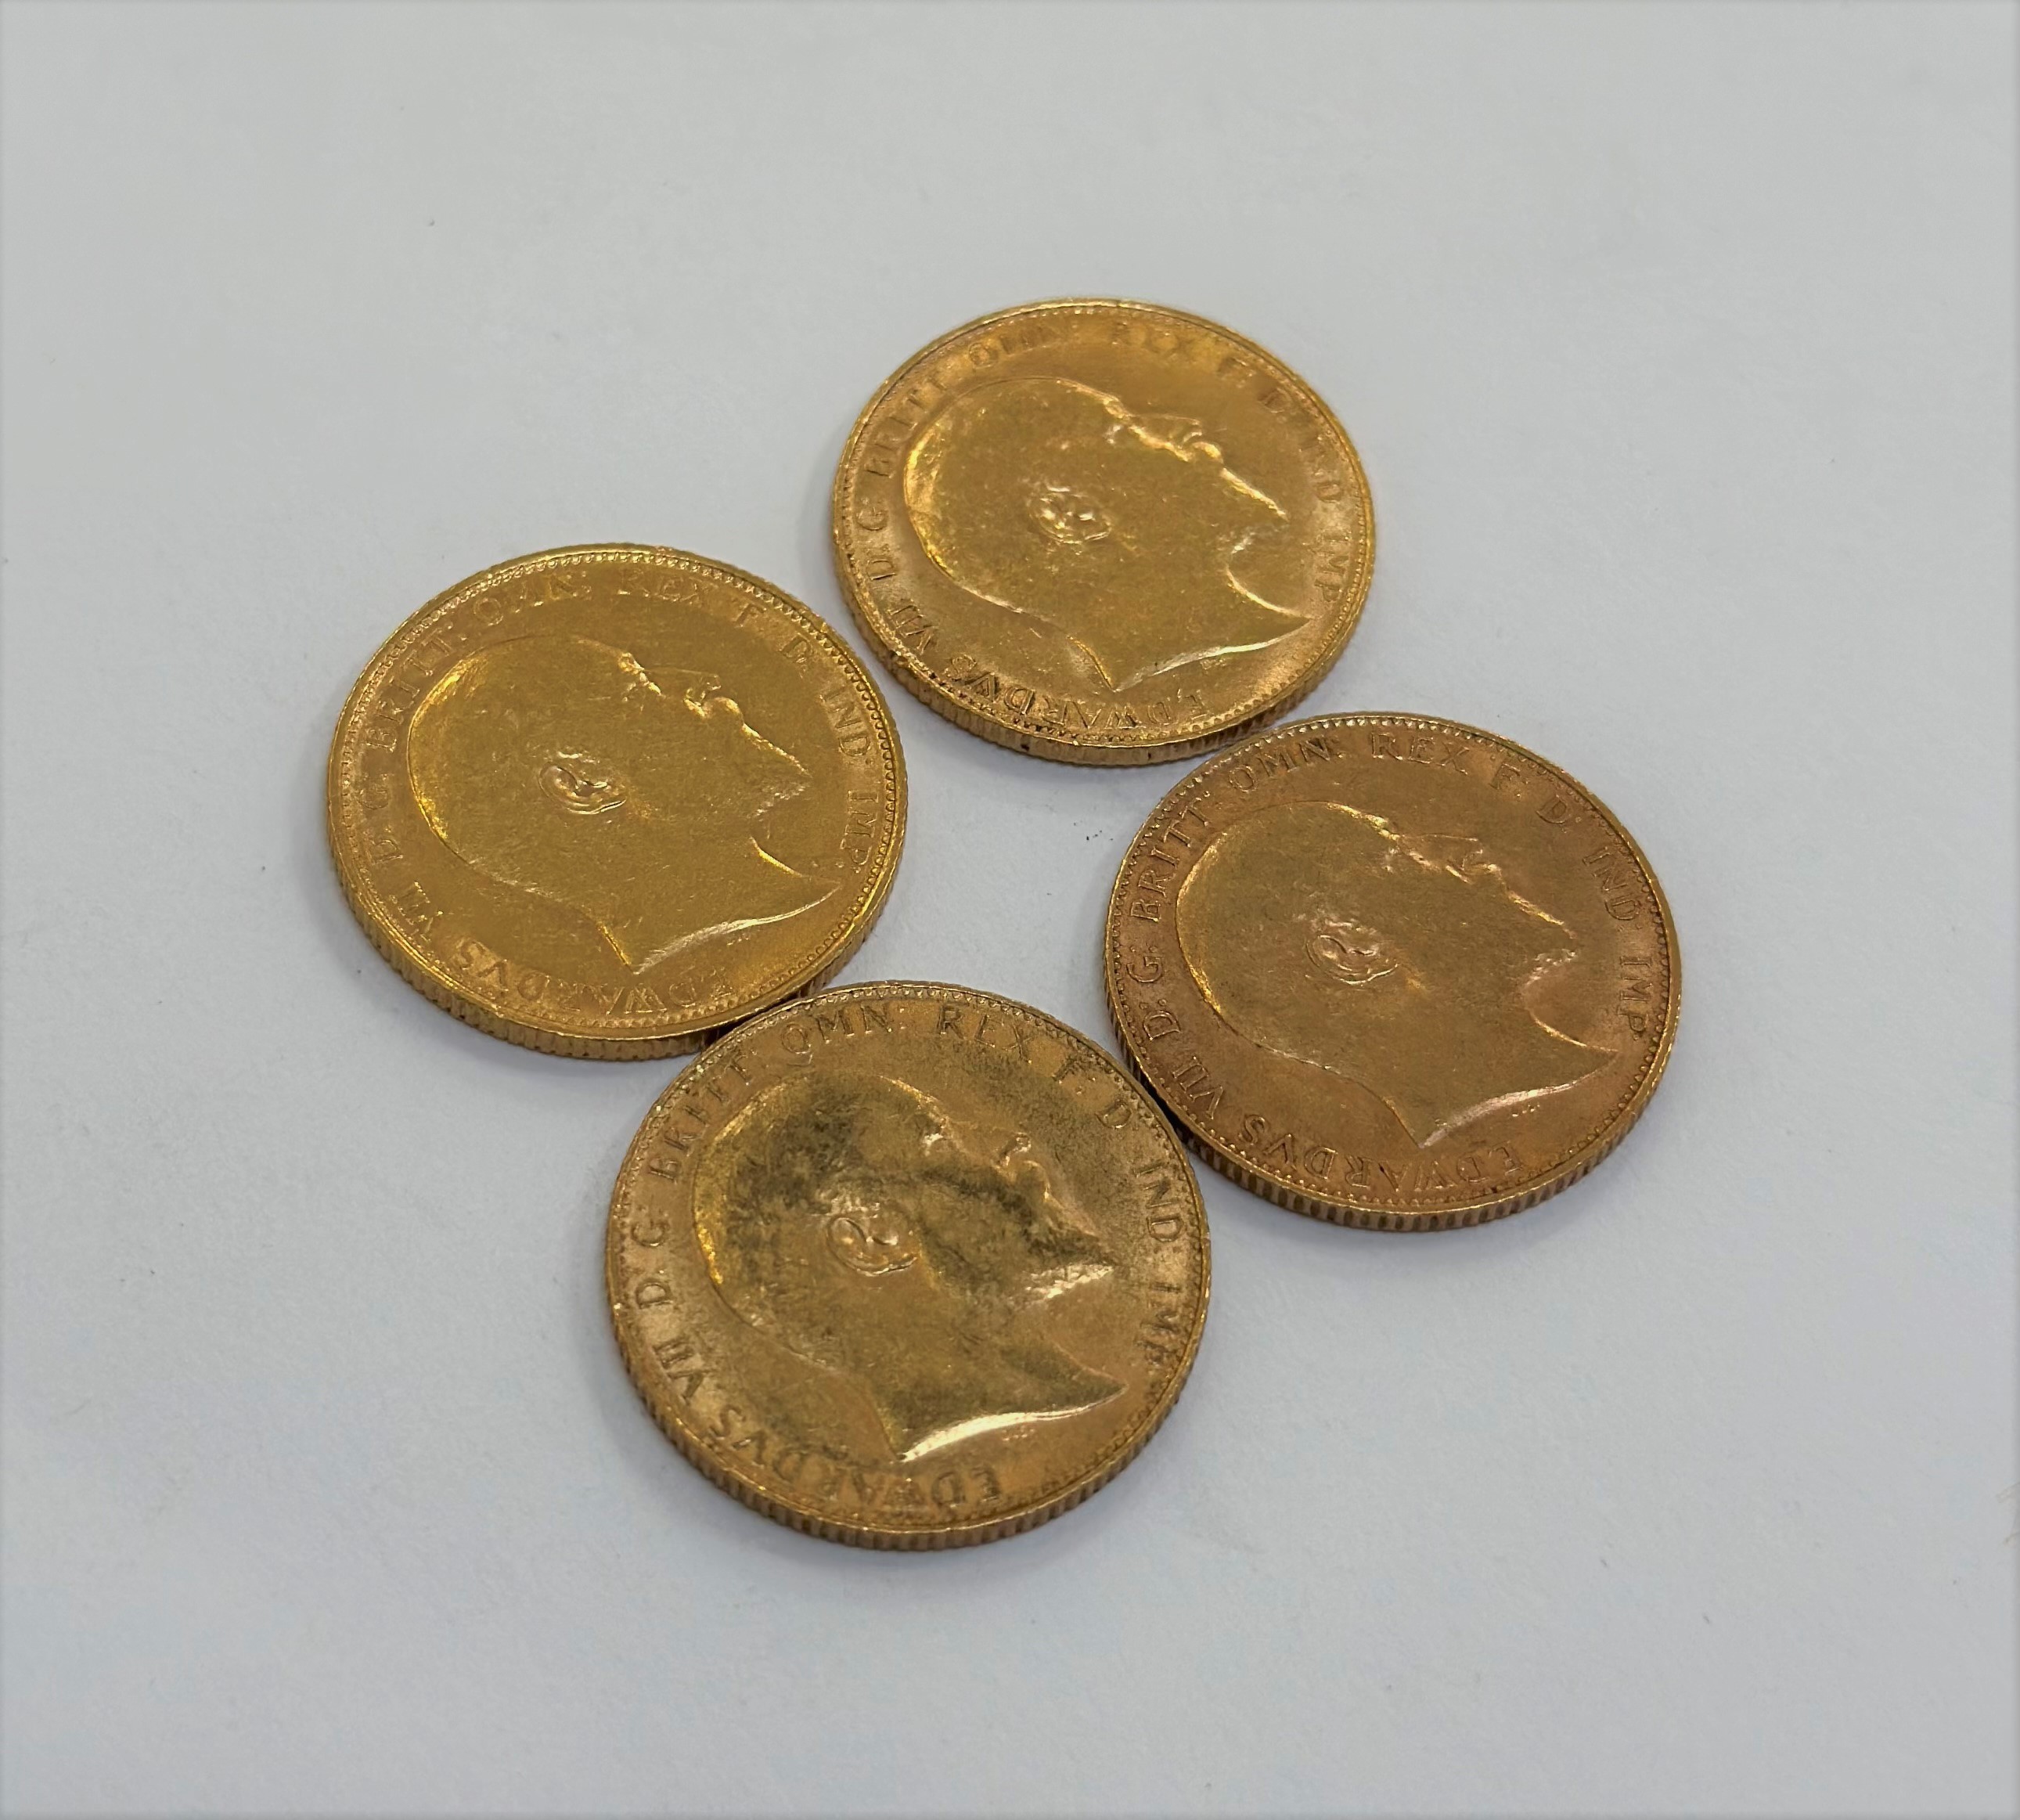 Four Edward VII gold sovereigns, 1904, 1907, 1908 and 1910 - Image 2 of 2